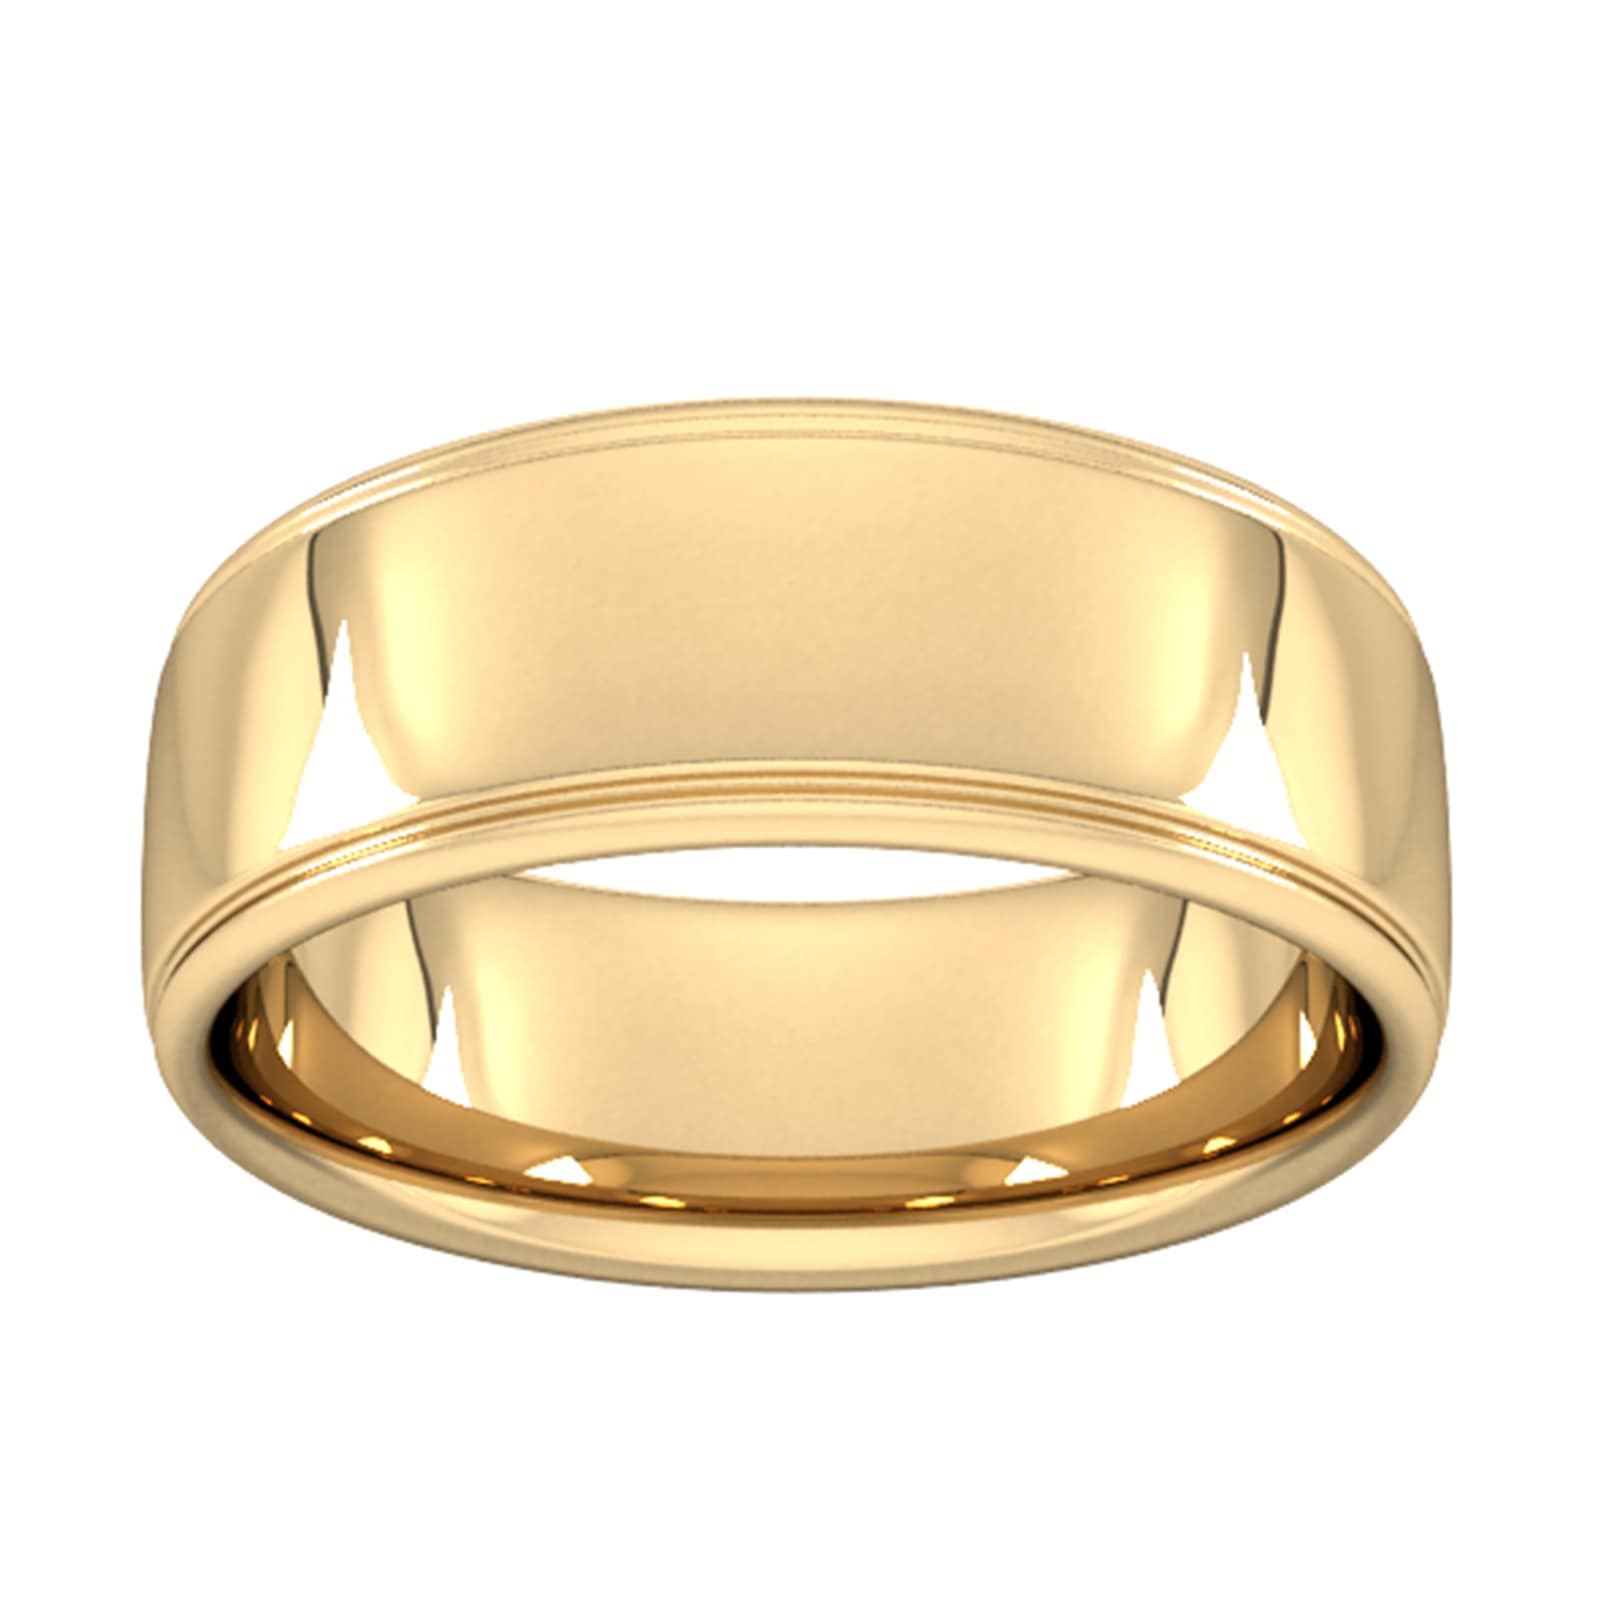 8mm Slight Court Heavy Polished Finish With Grooves Wedding Ring In 18 Carat Yellow Gold - Ring Size Y